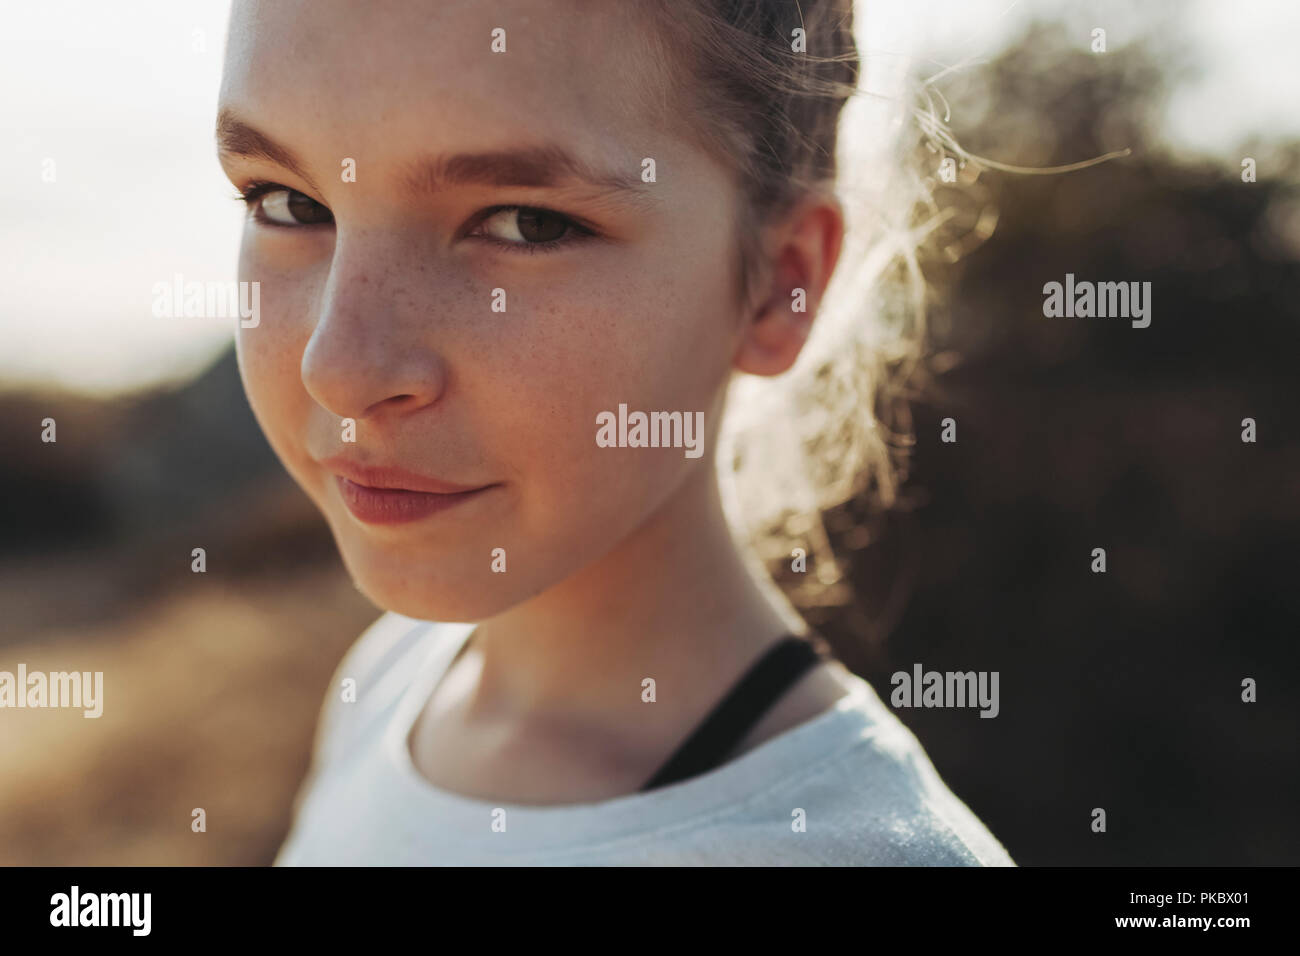 Close-up portrait of a preteen girl with freckles; Los Angeles, California, United States of America Stock Photo